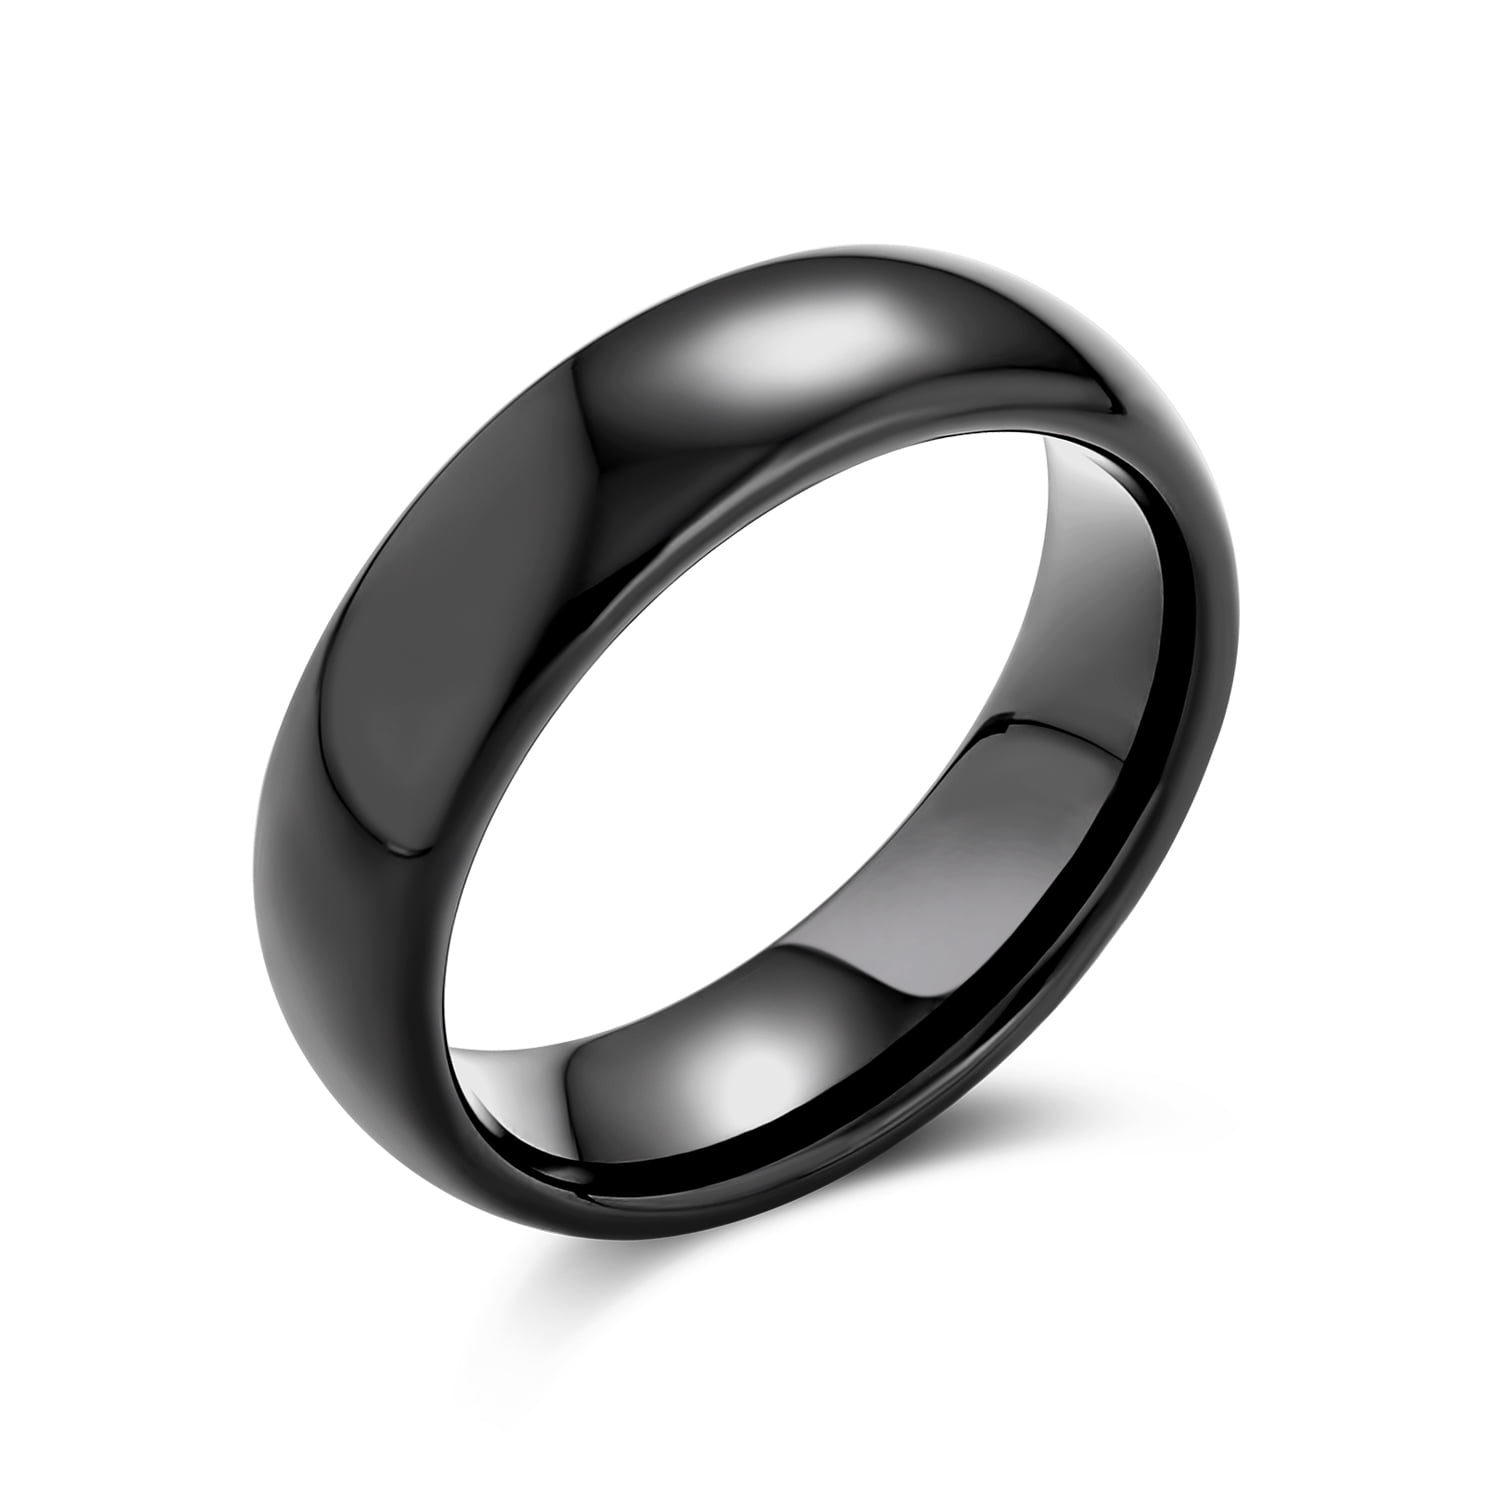 Bling Jewelry Personalize Unisex Plain Simple Dome Couples Titanium Wedding Band Ring for Men Women Comfort Fit Polished Black Silver Rose Gold Tone 5MM 